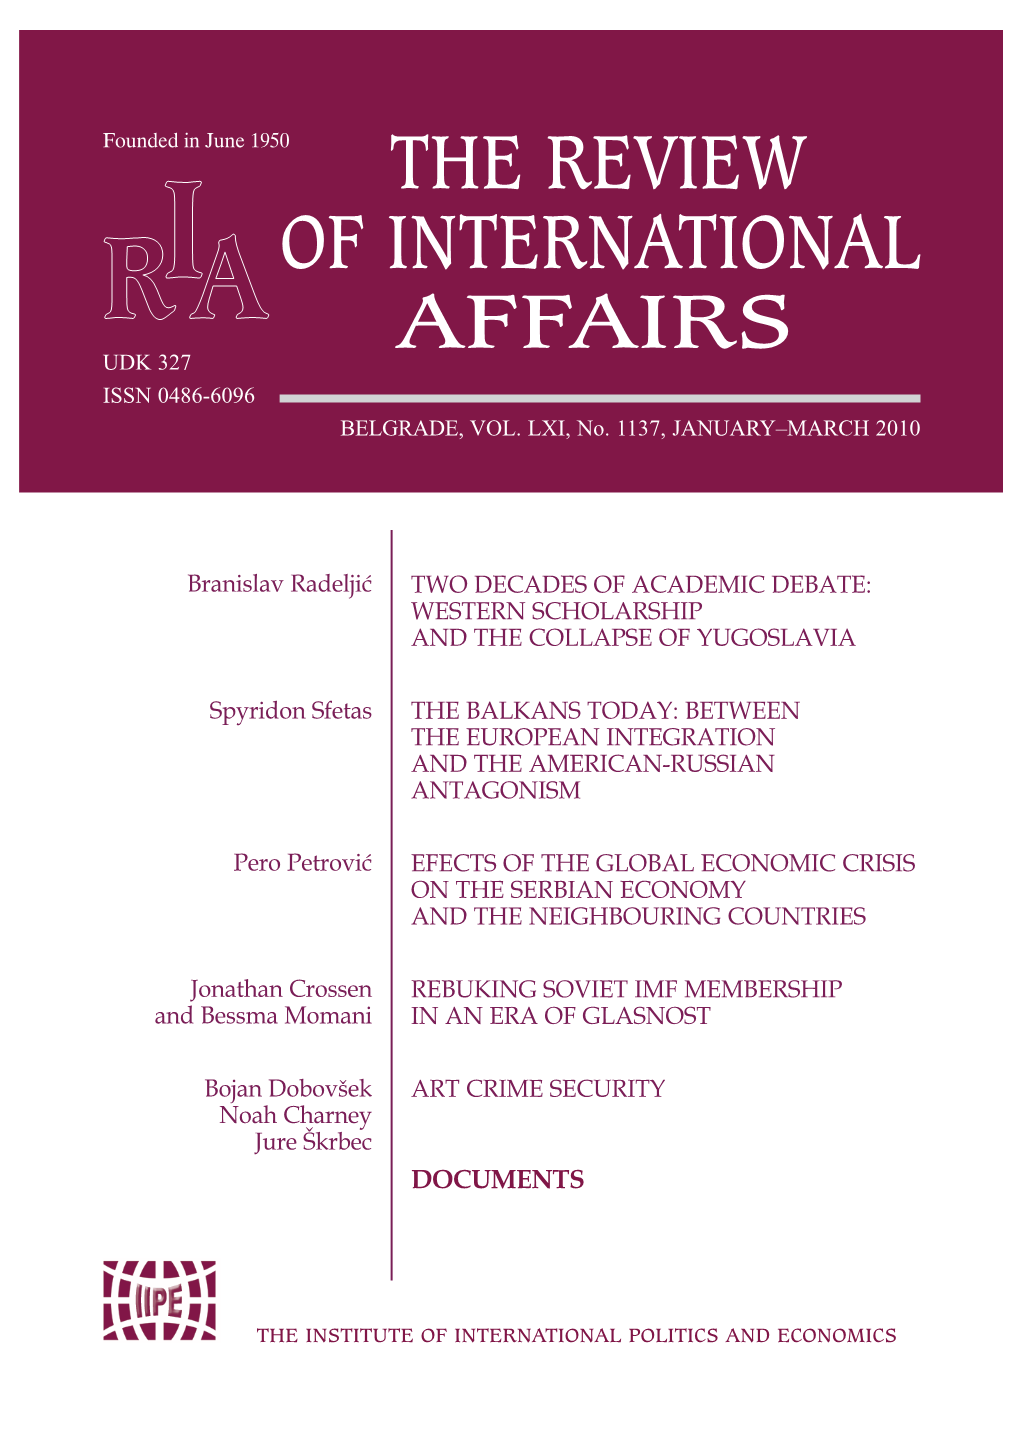 The Review of International Affairs